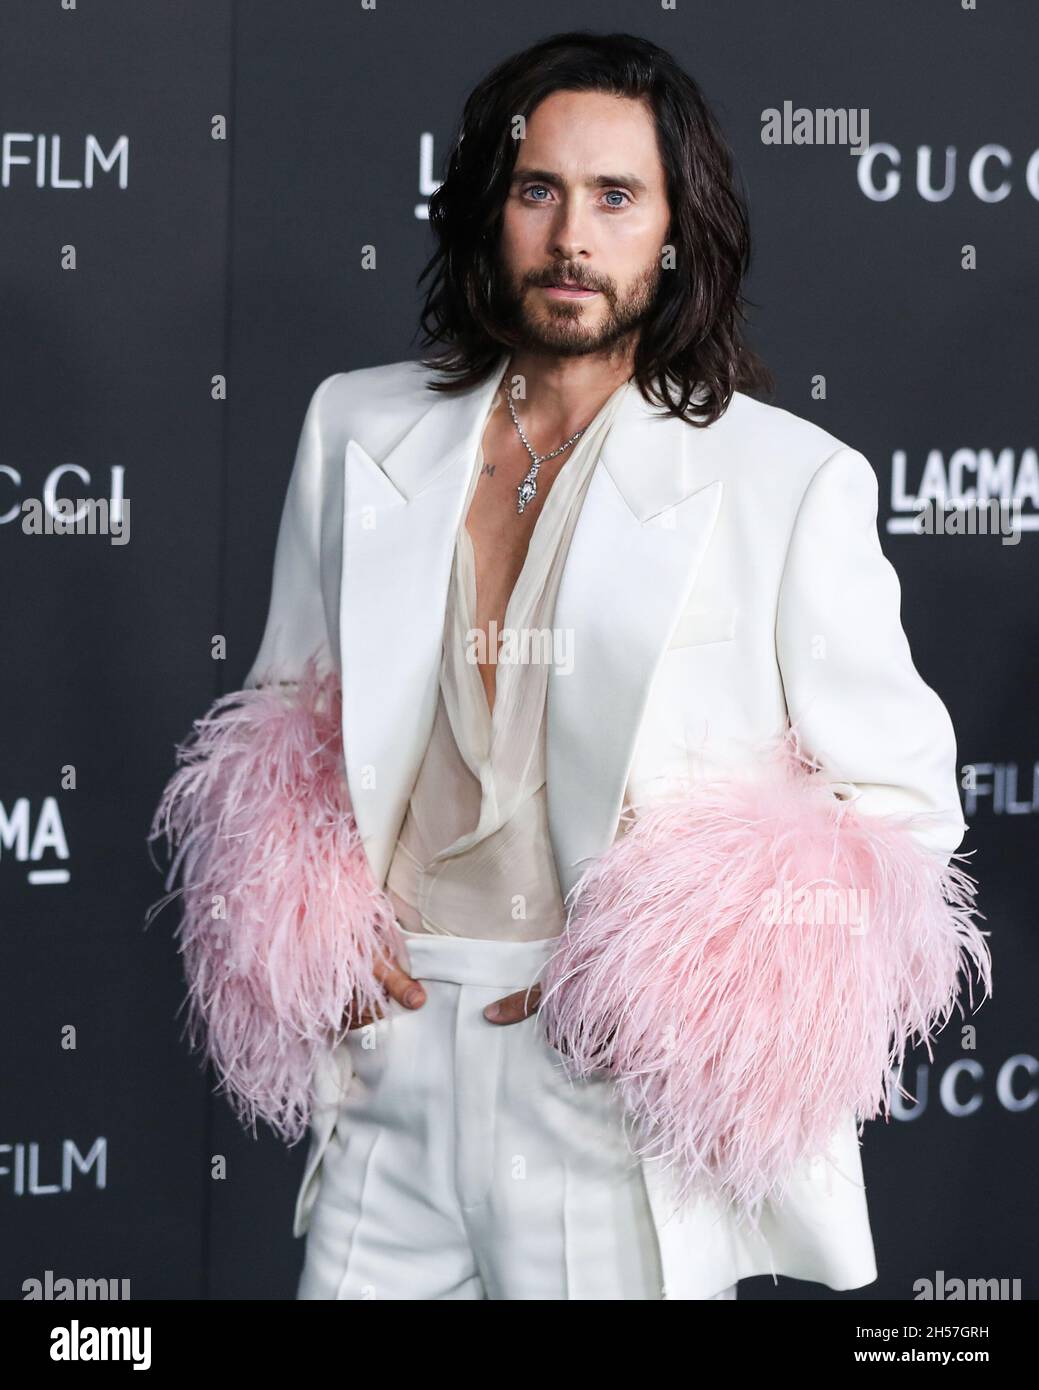 los-angeles-california-usa-november-06-actor-jared-leto-wearing-an-outfit-by-gucci-arrives-at-...jpg